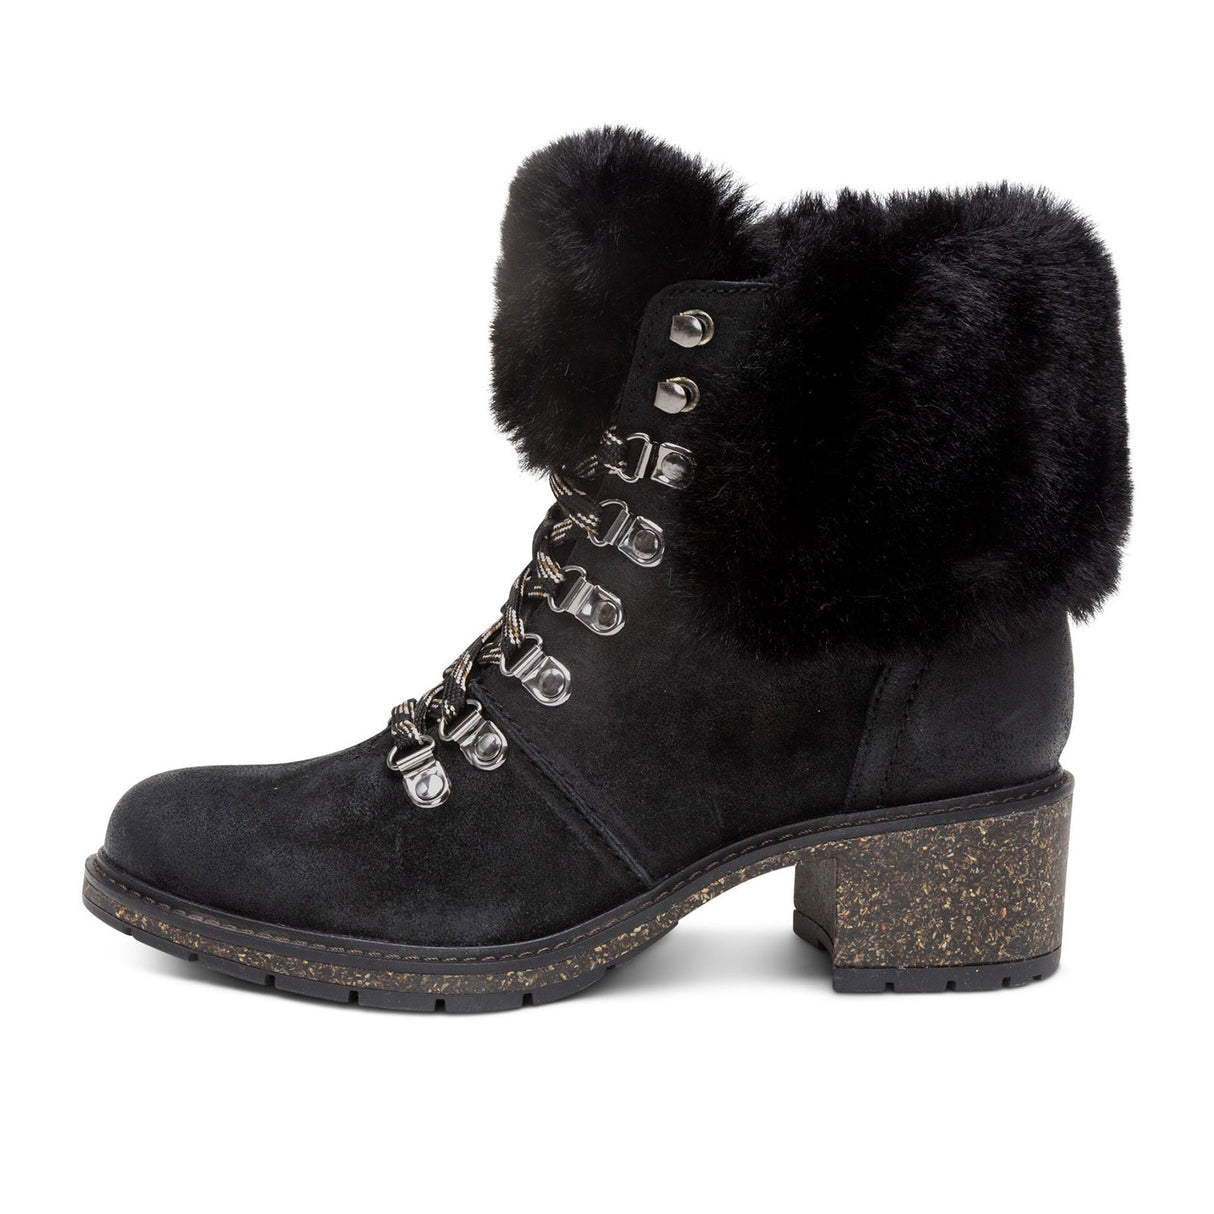 Aetrex Brooklyn Boot (Women) - Black Boots - Fashion - Mid Boot - The Heel Shoe Fitters